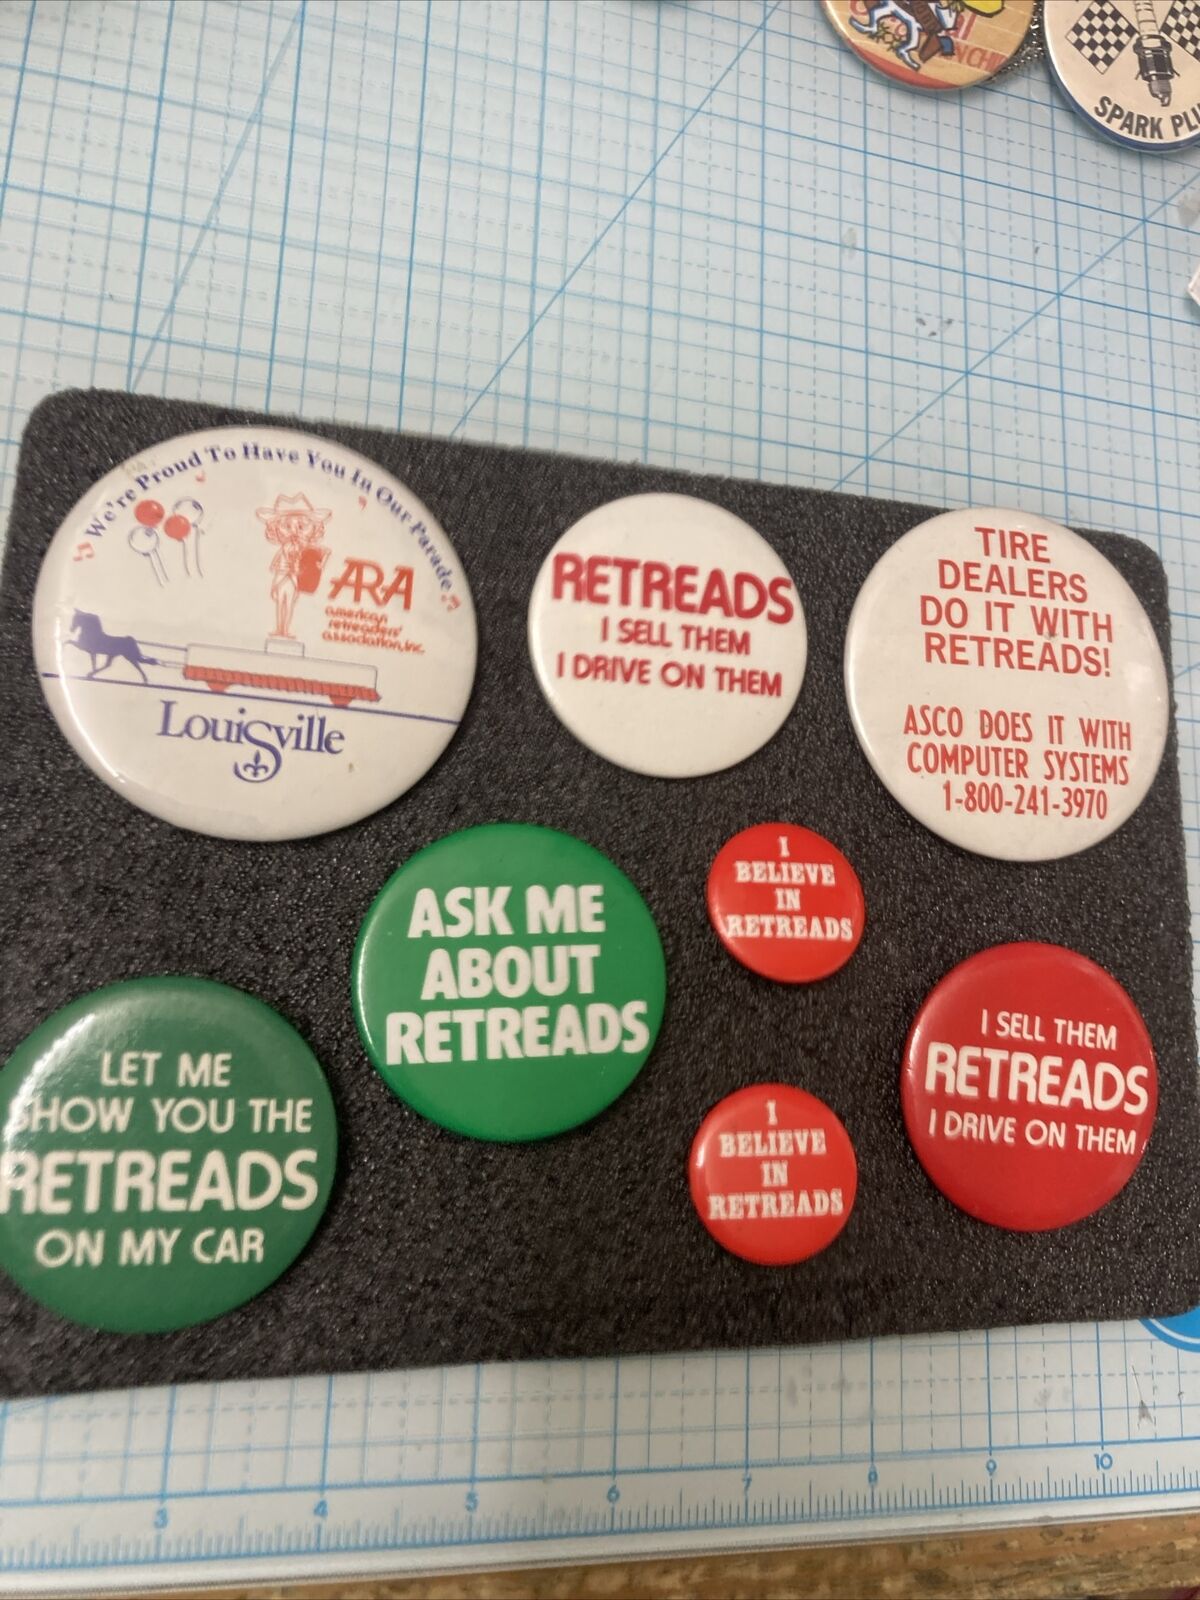 8 USED Vtg. Round Retreads/Tire Dealer Retreads Pins. Various Sizes/Colors. NICE